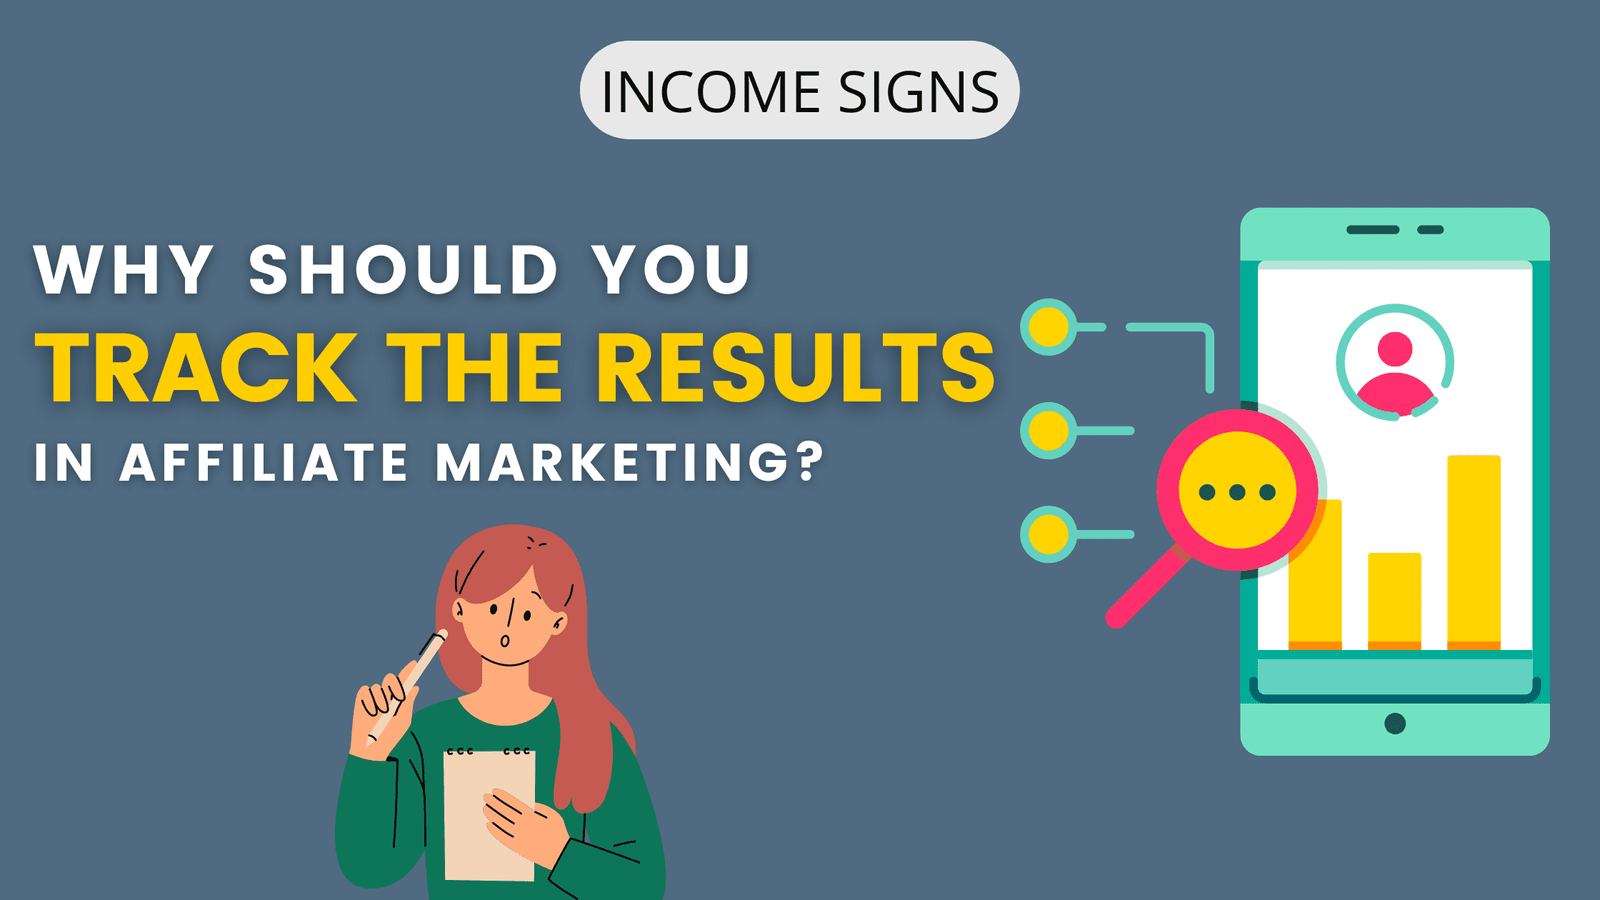 Why Should You Track The Results in Affiliate Marketing